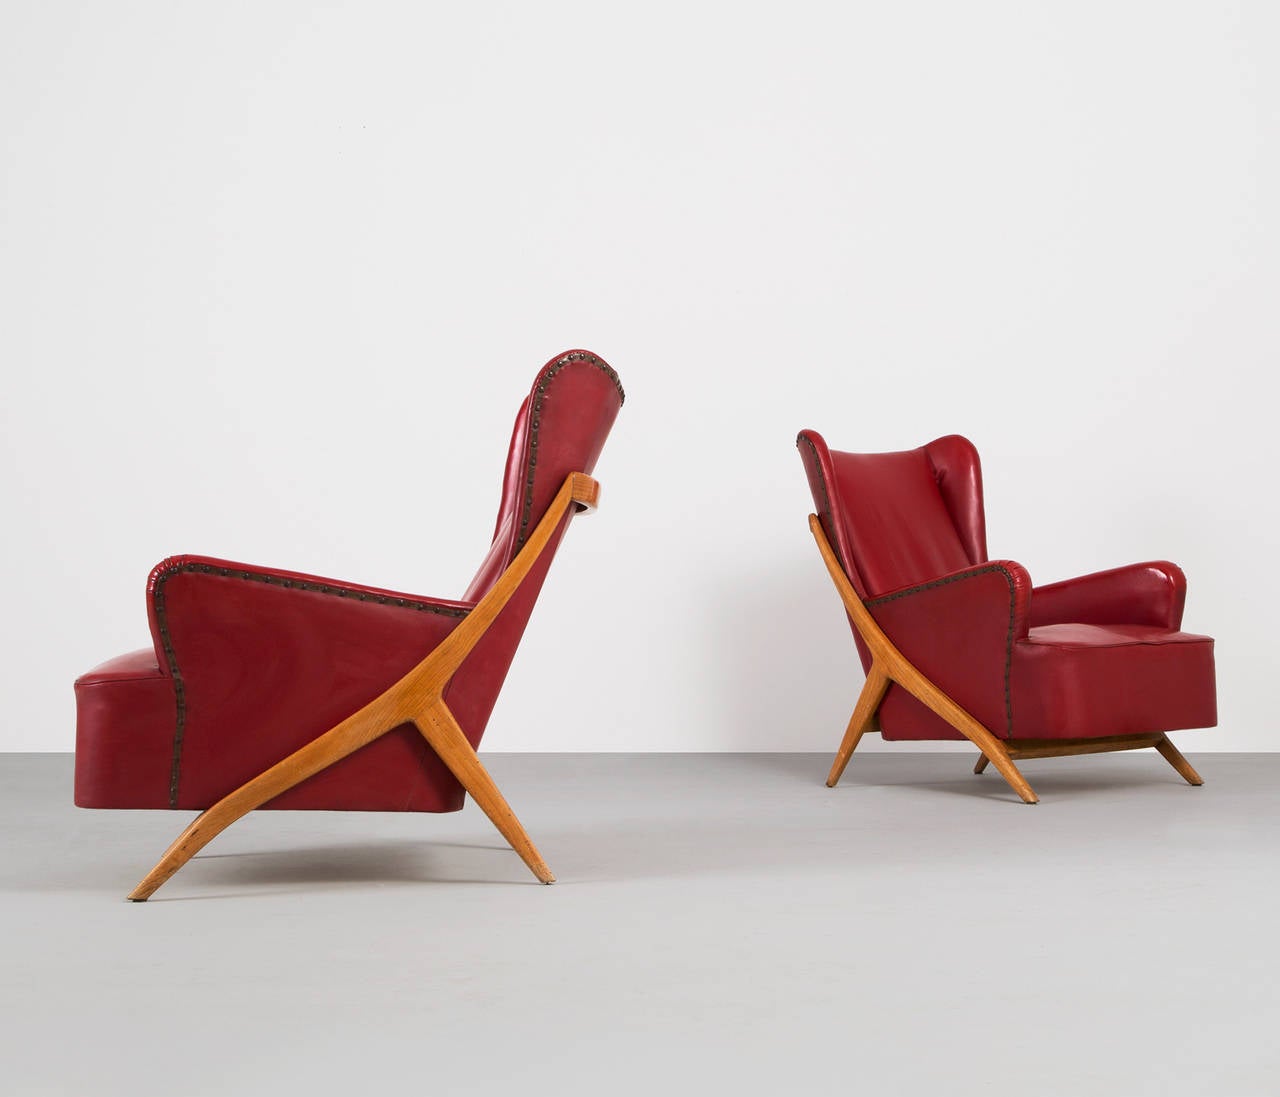 Set of two lounge chairs by Mario Gottardi, Italy.

A very elegant set of chairs of excellent quality and very well constructed manufacture. Wonderful organic details in the legs.

The seats are covered in their original red skai leather which